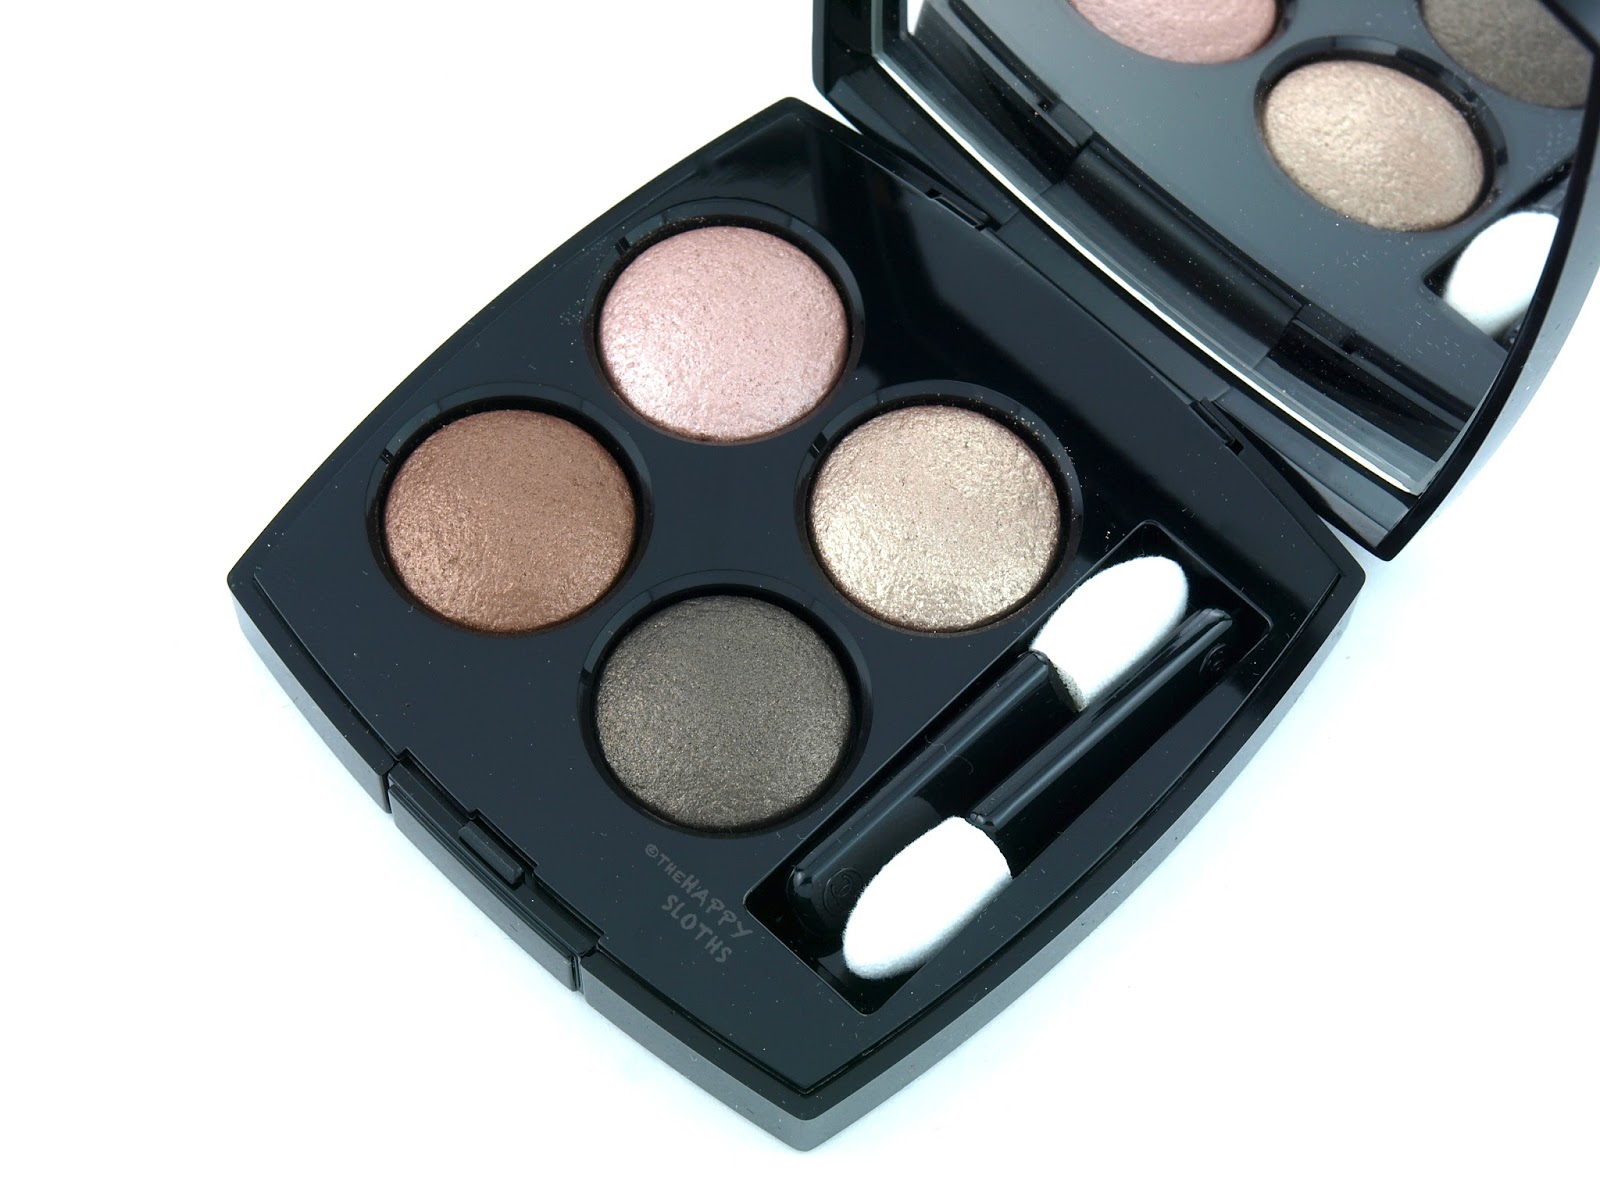 Chanel Les 4 Ombres in "278 Codes Subtils"